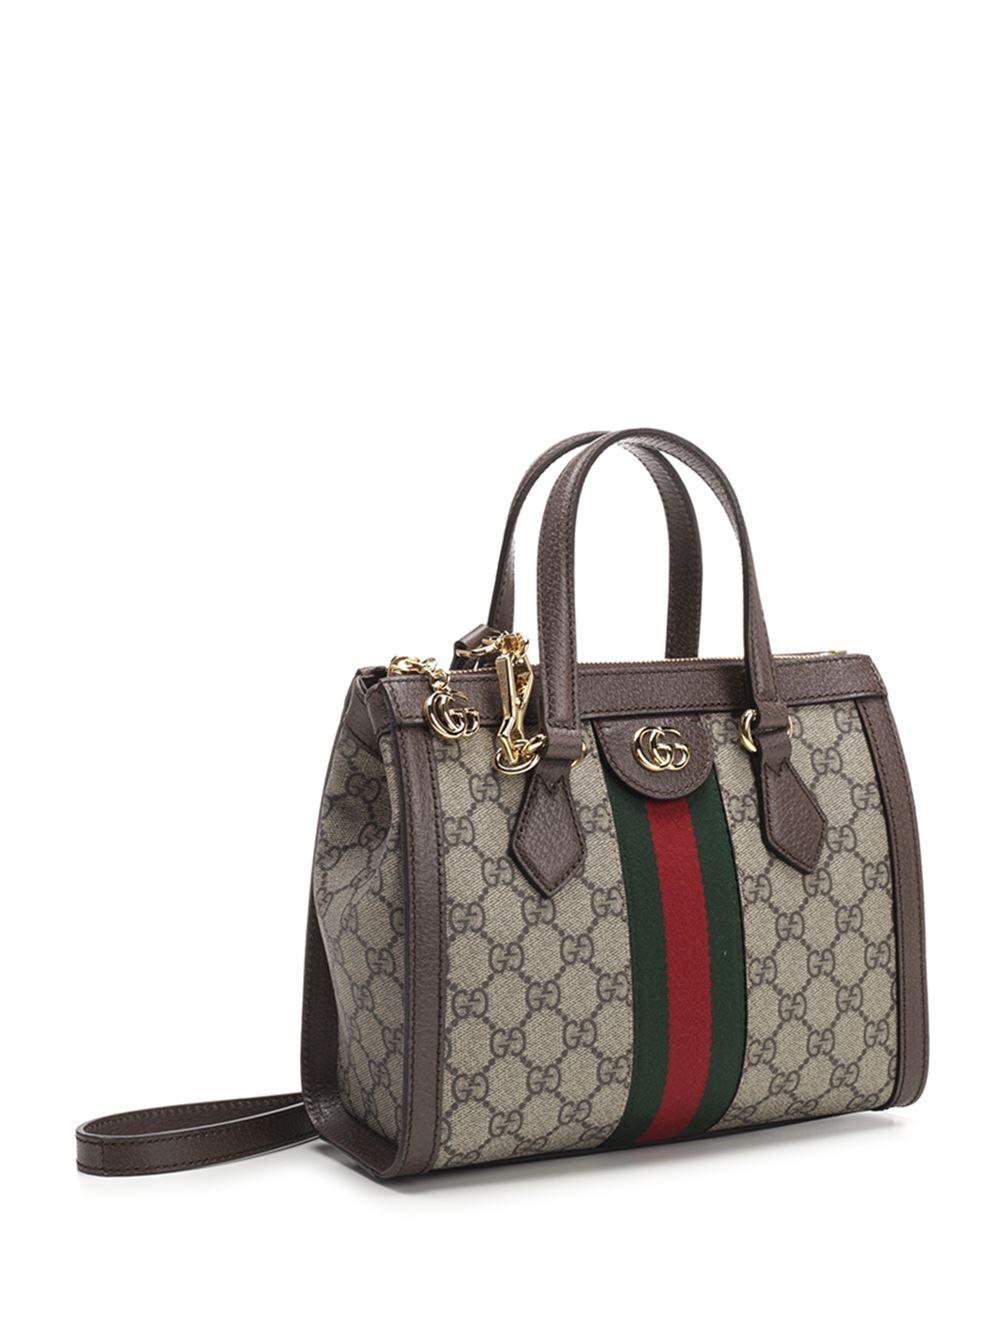 Gucci Canvas Ophidia Small GG Tote Bag - Save 15% - Lyst